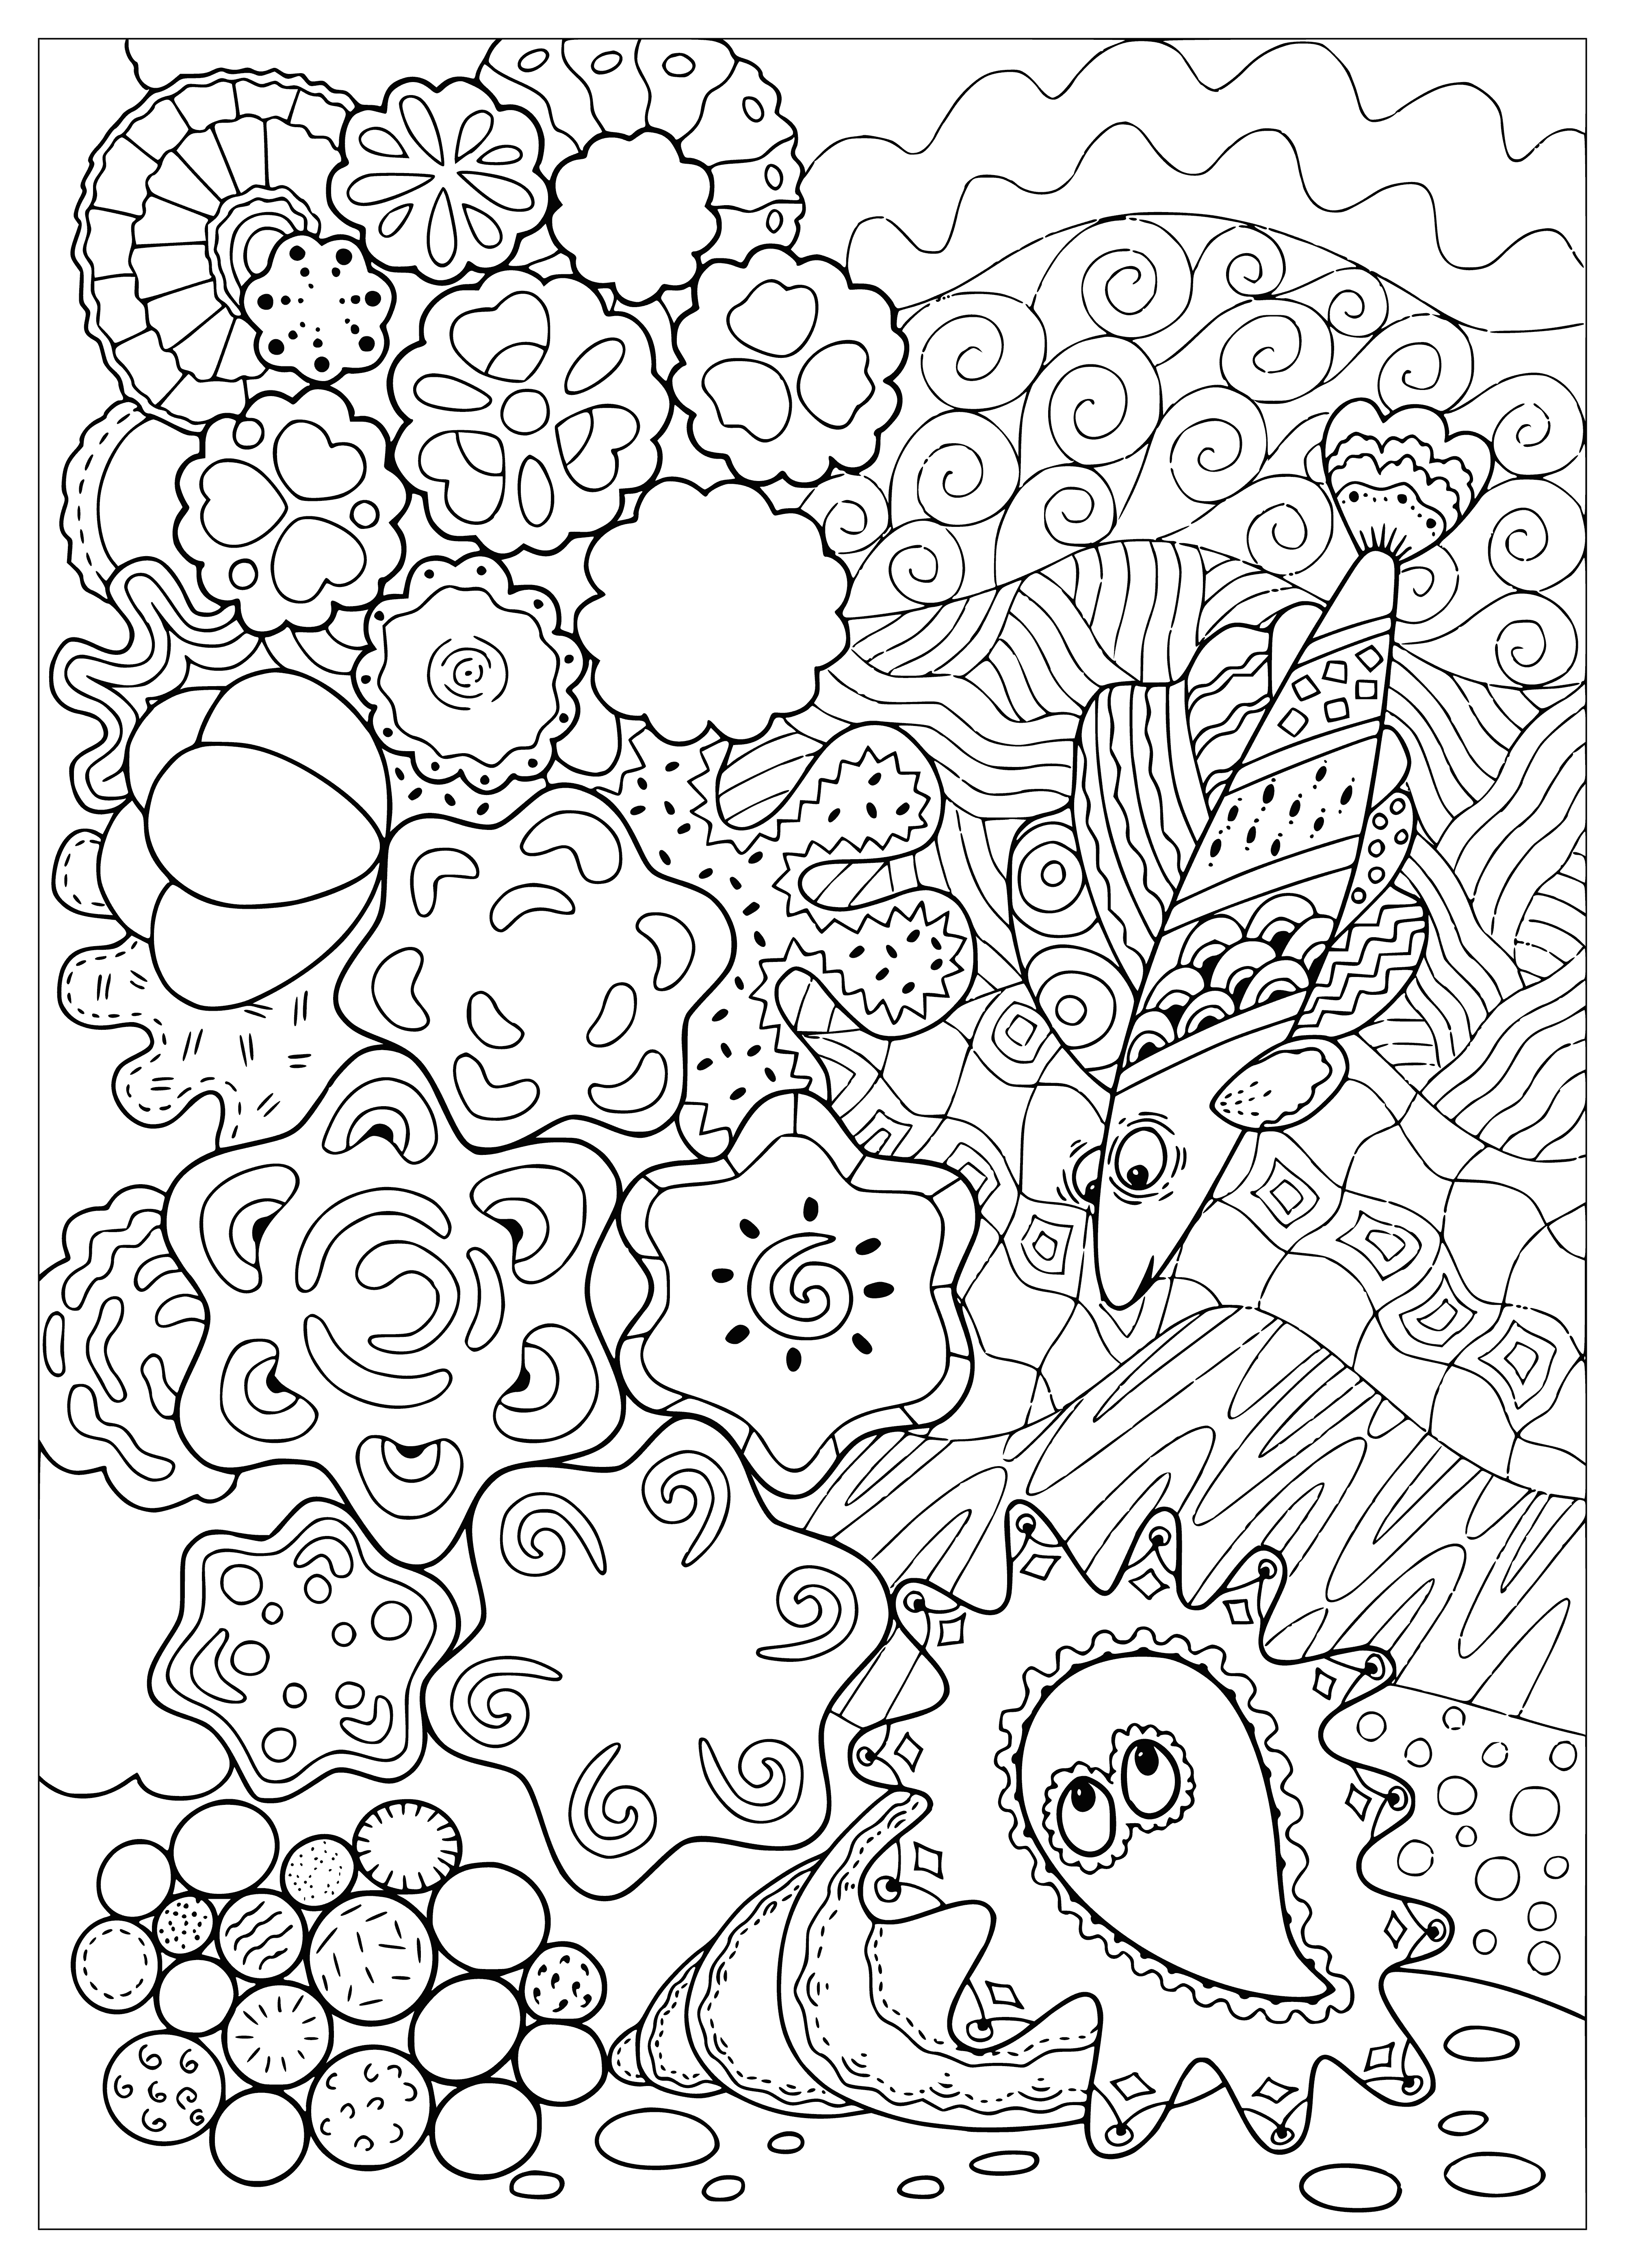 coloring page: A tranquil underwater scene with fish, coral and a turtle. Perfect for coloring & relaxation with calming colors.